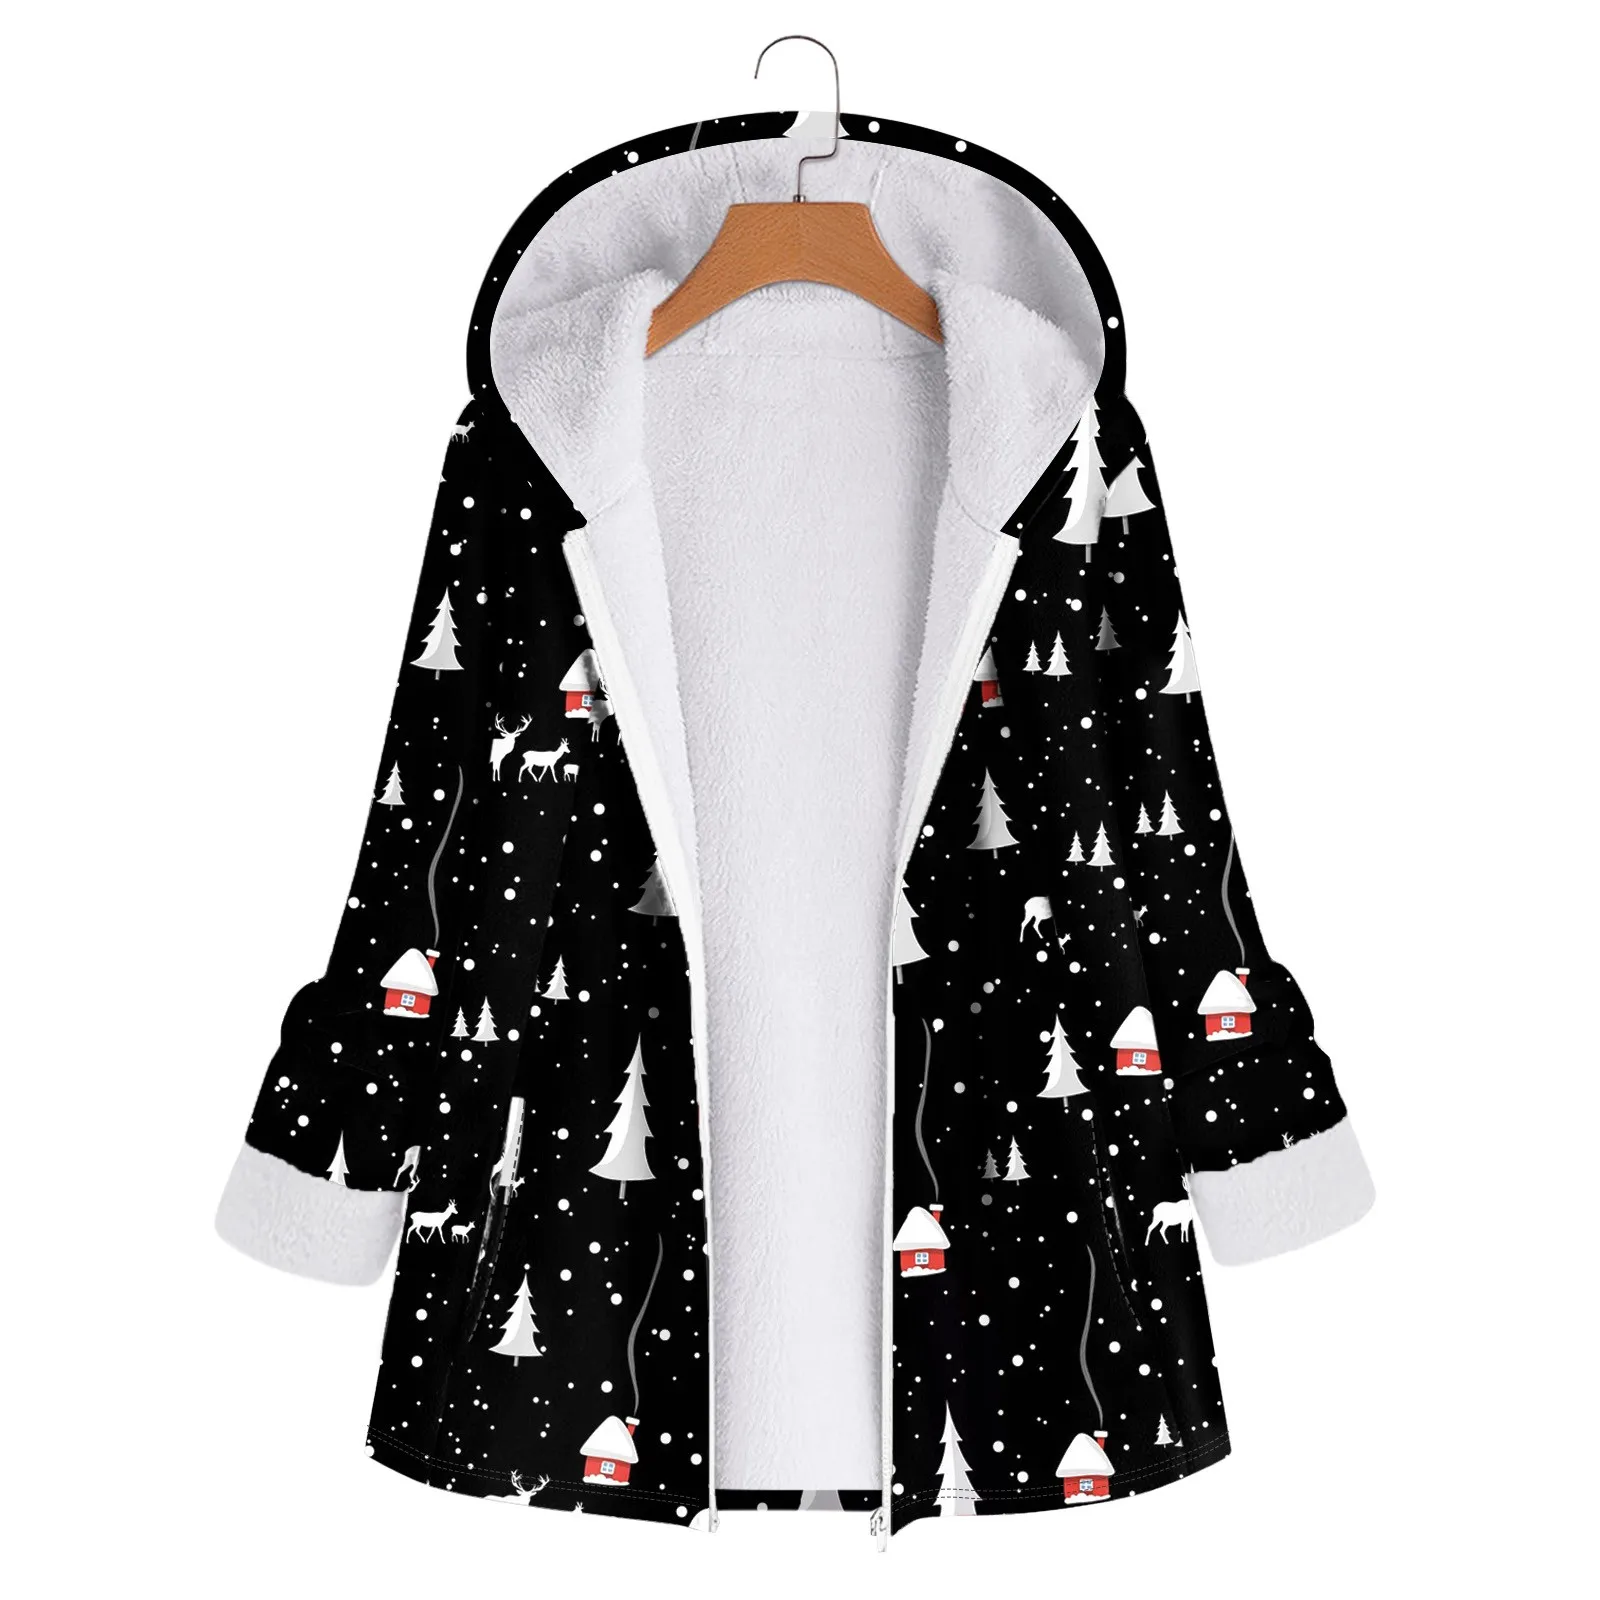 

Womens Autumn Winter Casual Warm Prints Stitching h Cardigan Coat Jacket Kpop Korean style casual Fairycore Cropped Tops